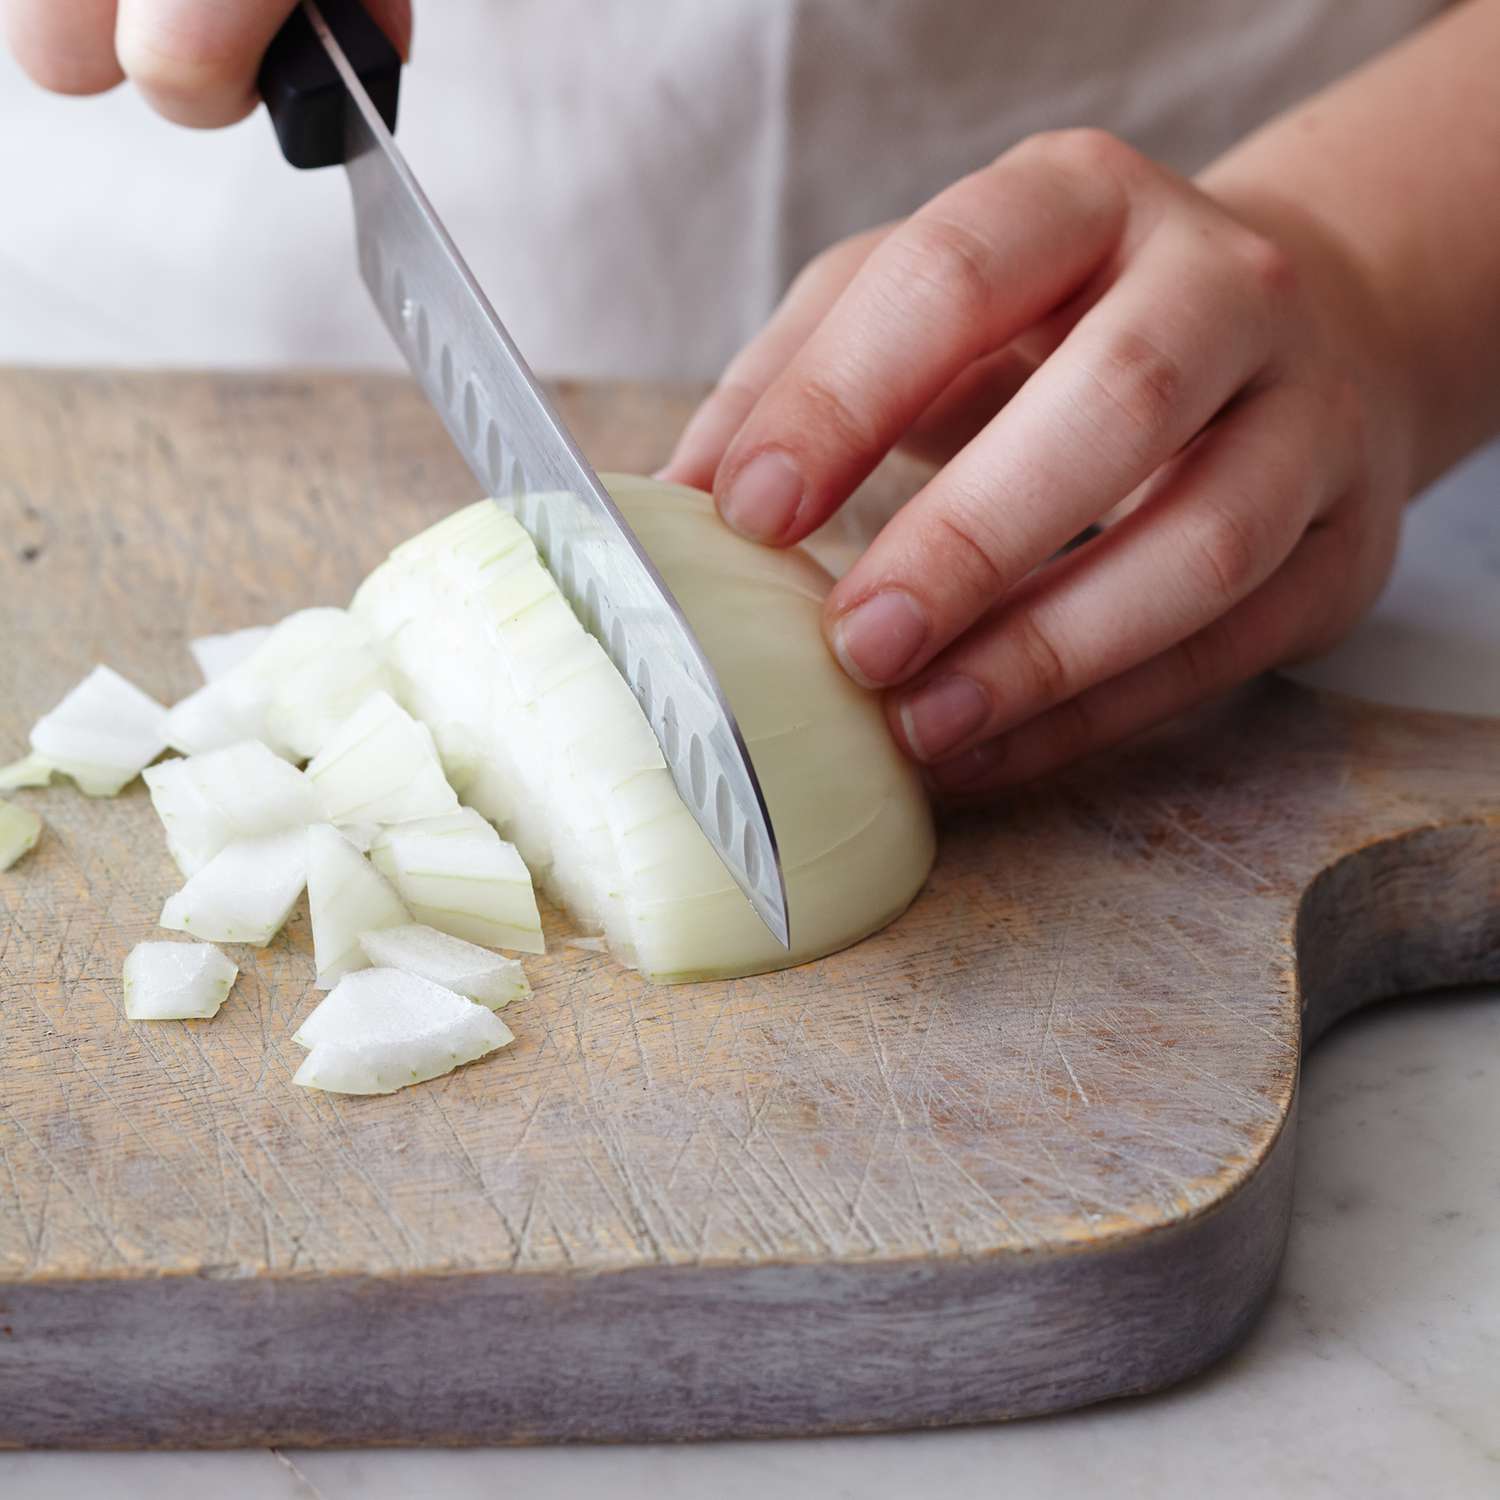 Midsection of woman chopping white onion on cutting board